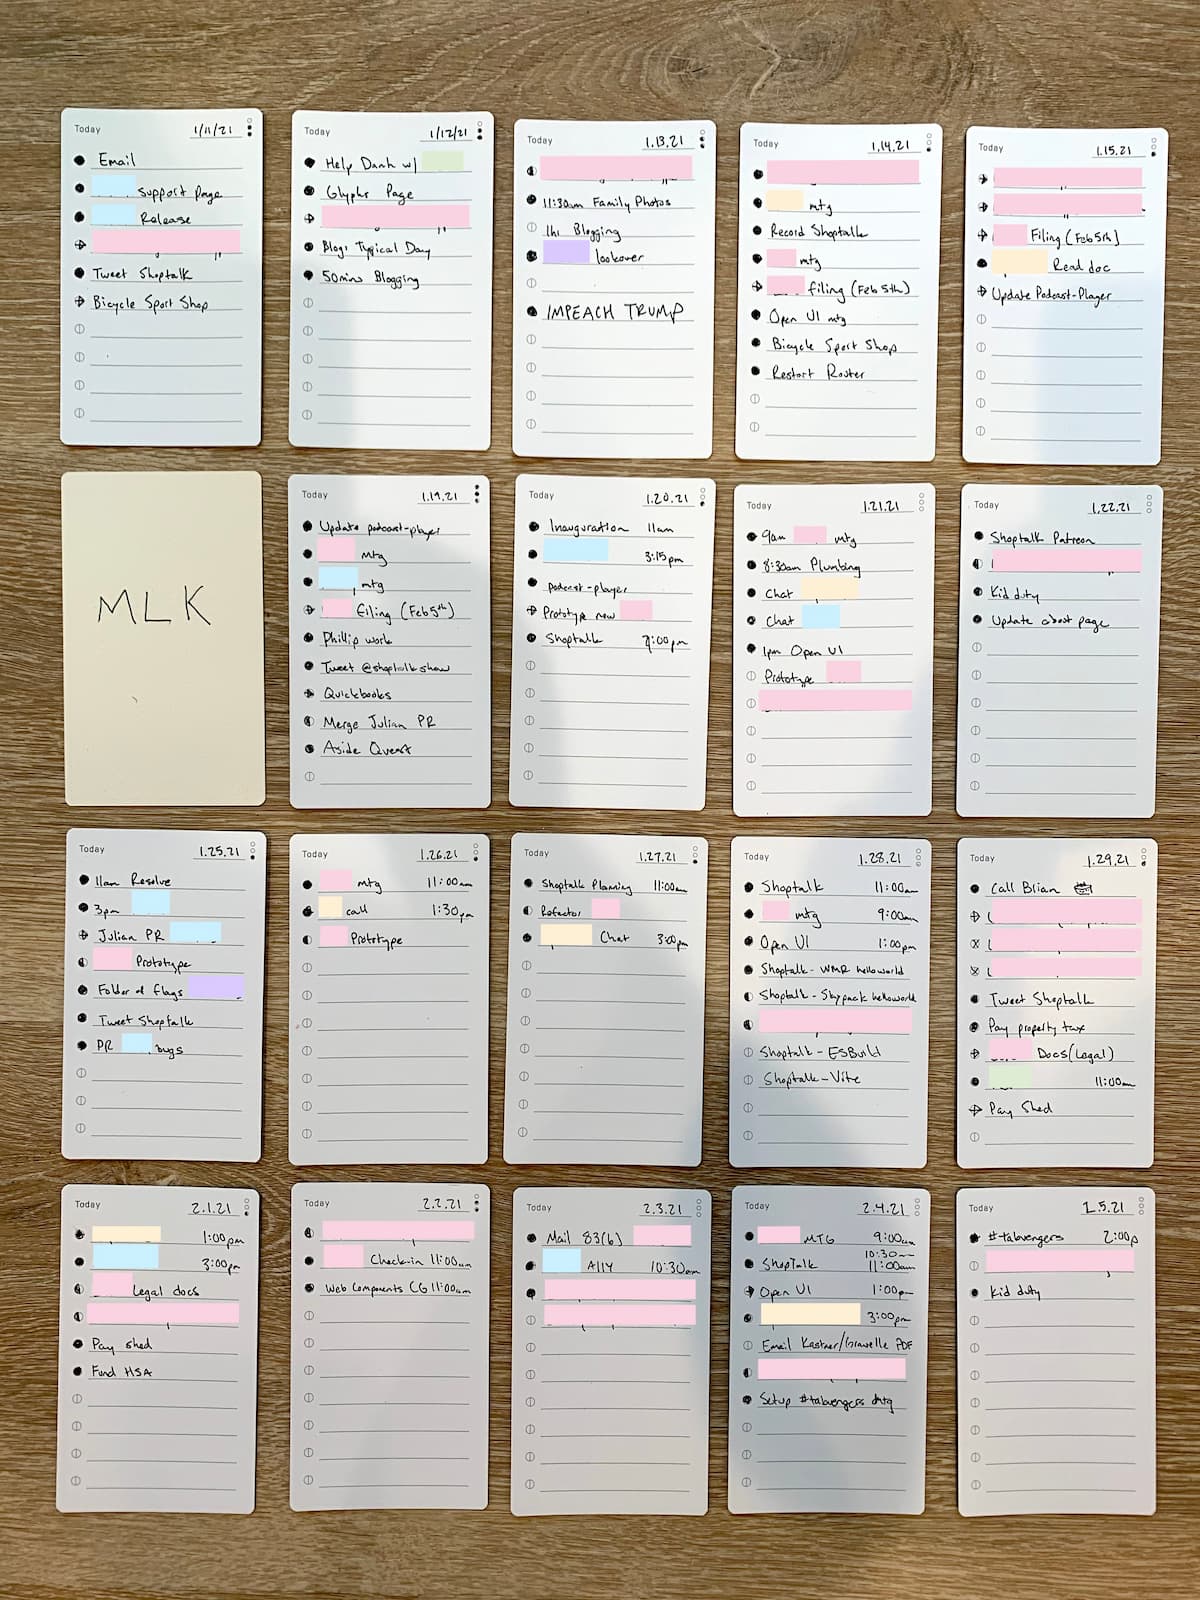 Daily task cards arrayed in a 5x4 grid. Each card has an average of 3~5 tasks and projects are color coded.